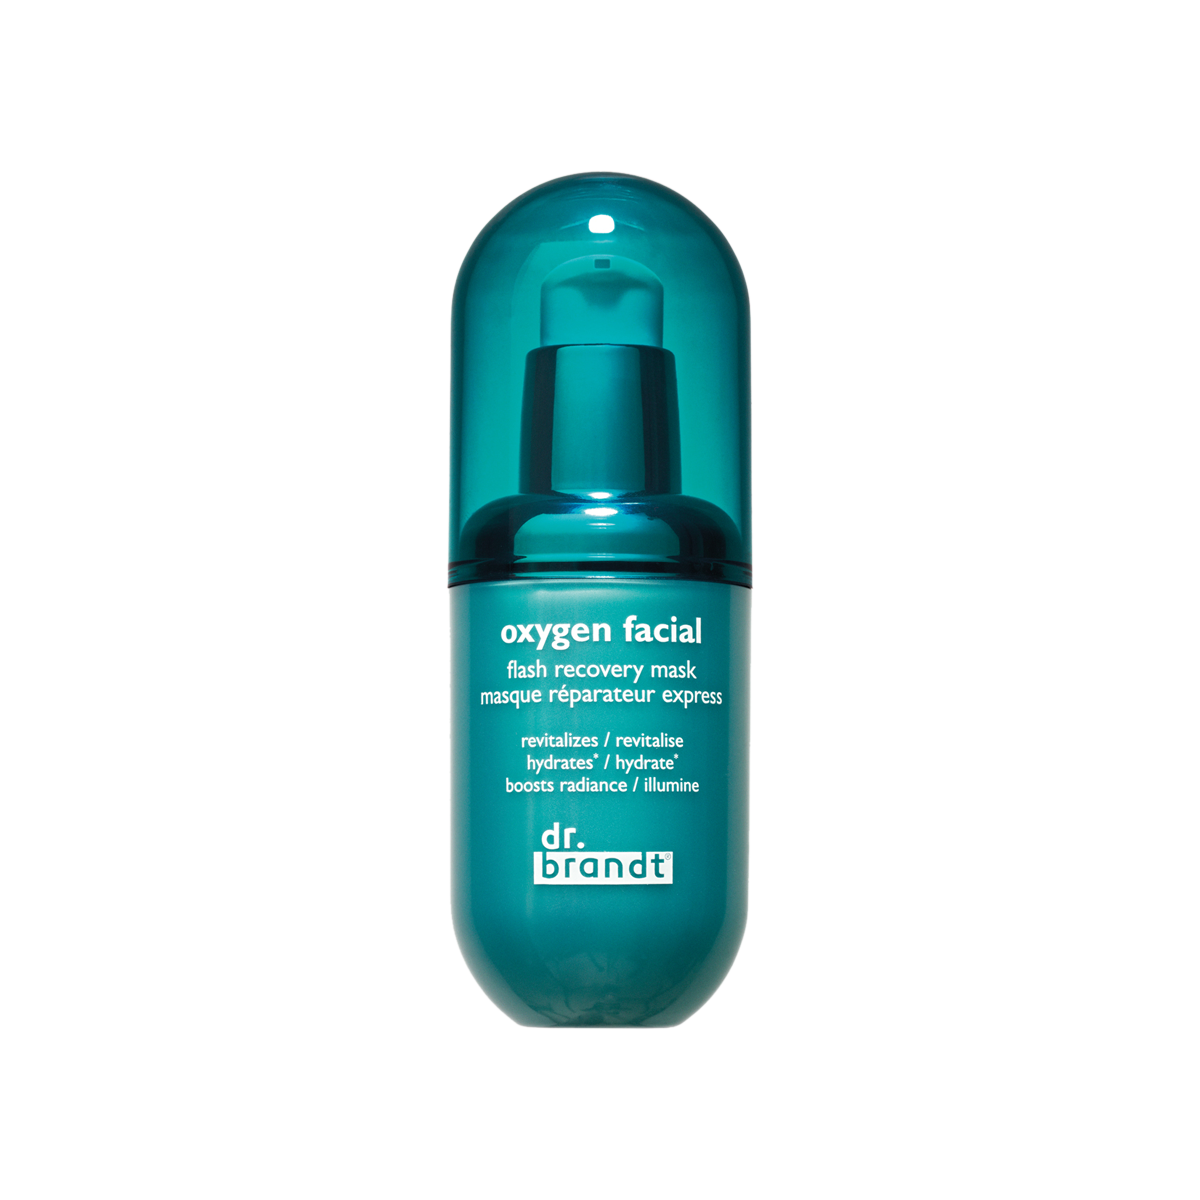 Dr. Brandt - Oxygen Facial Flash Recovery Mask